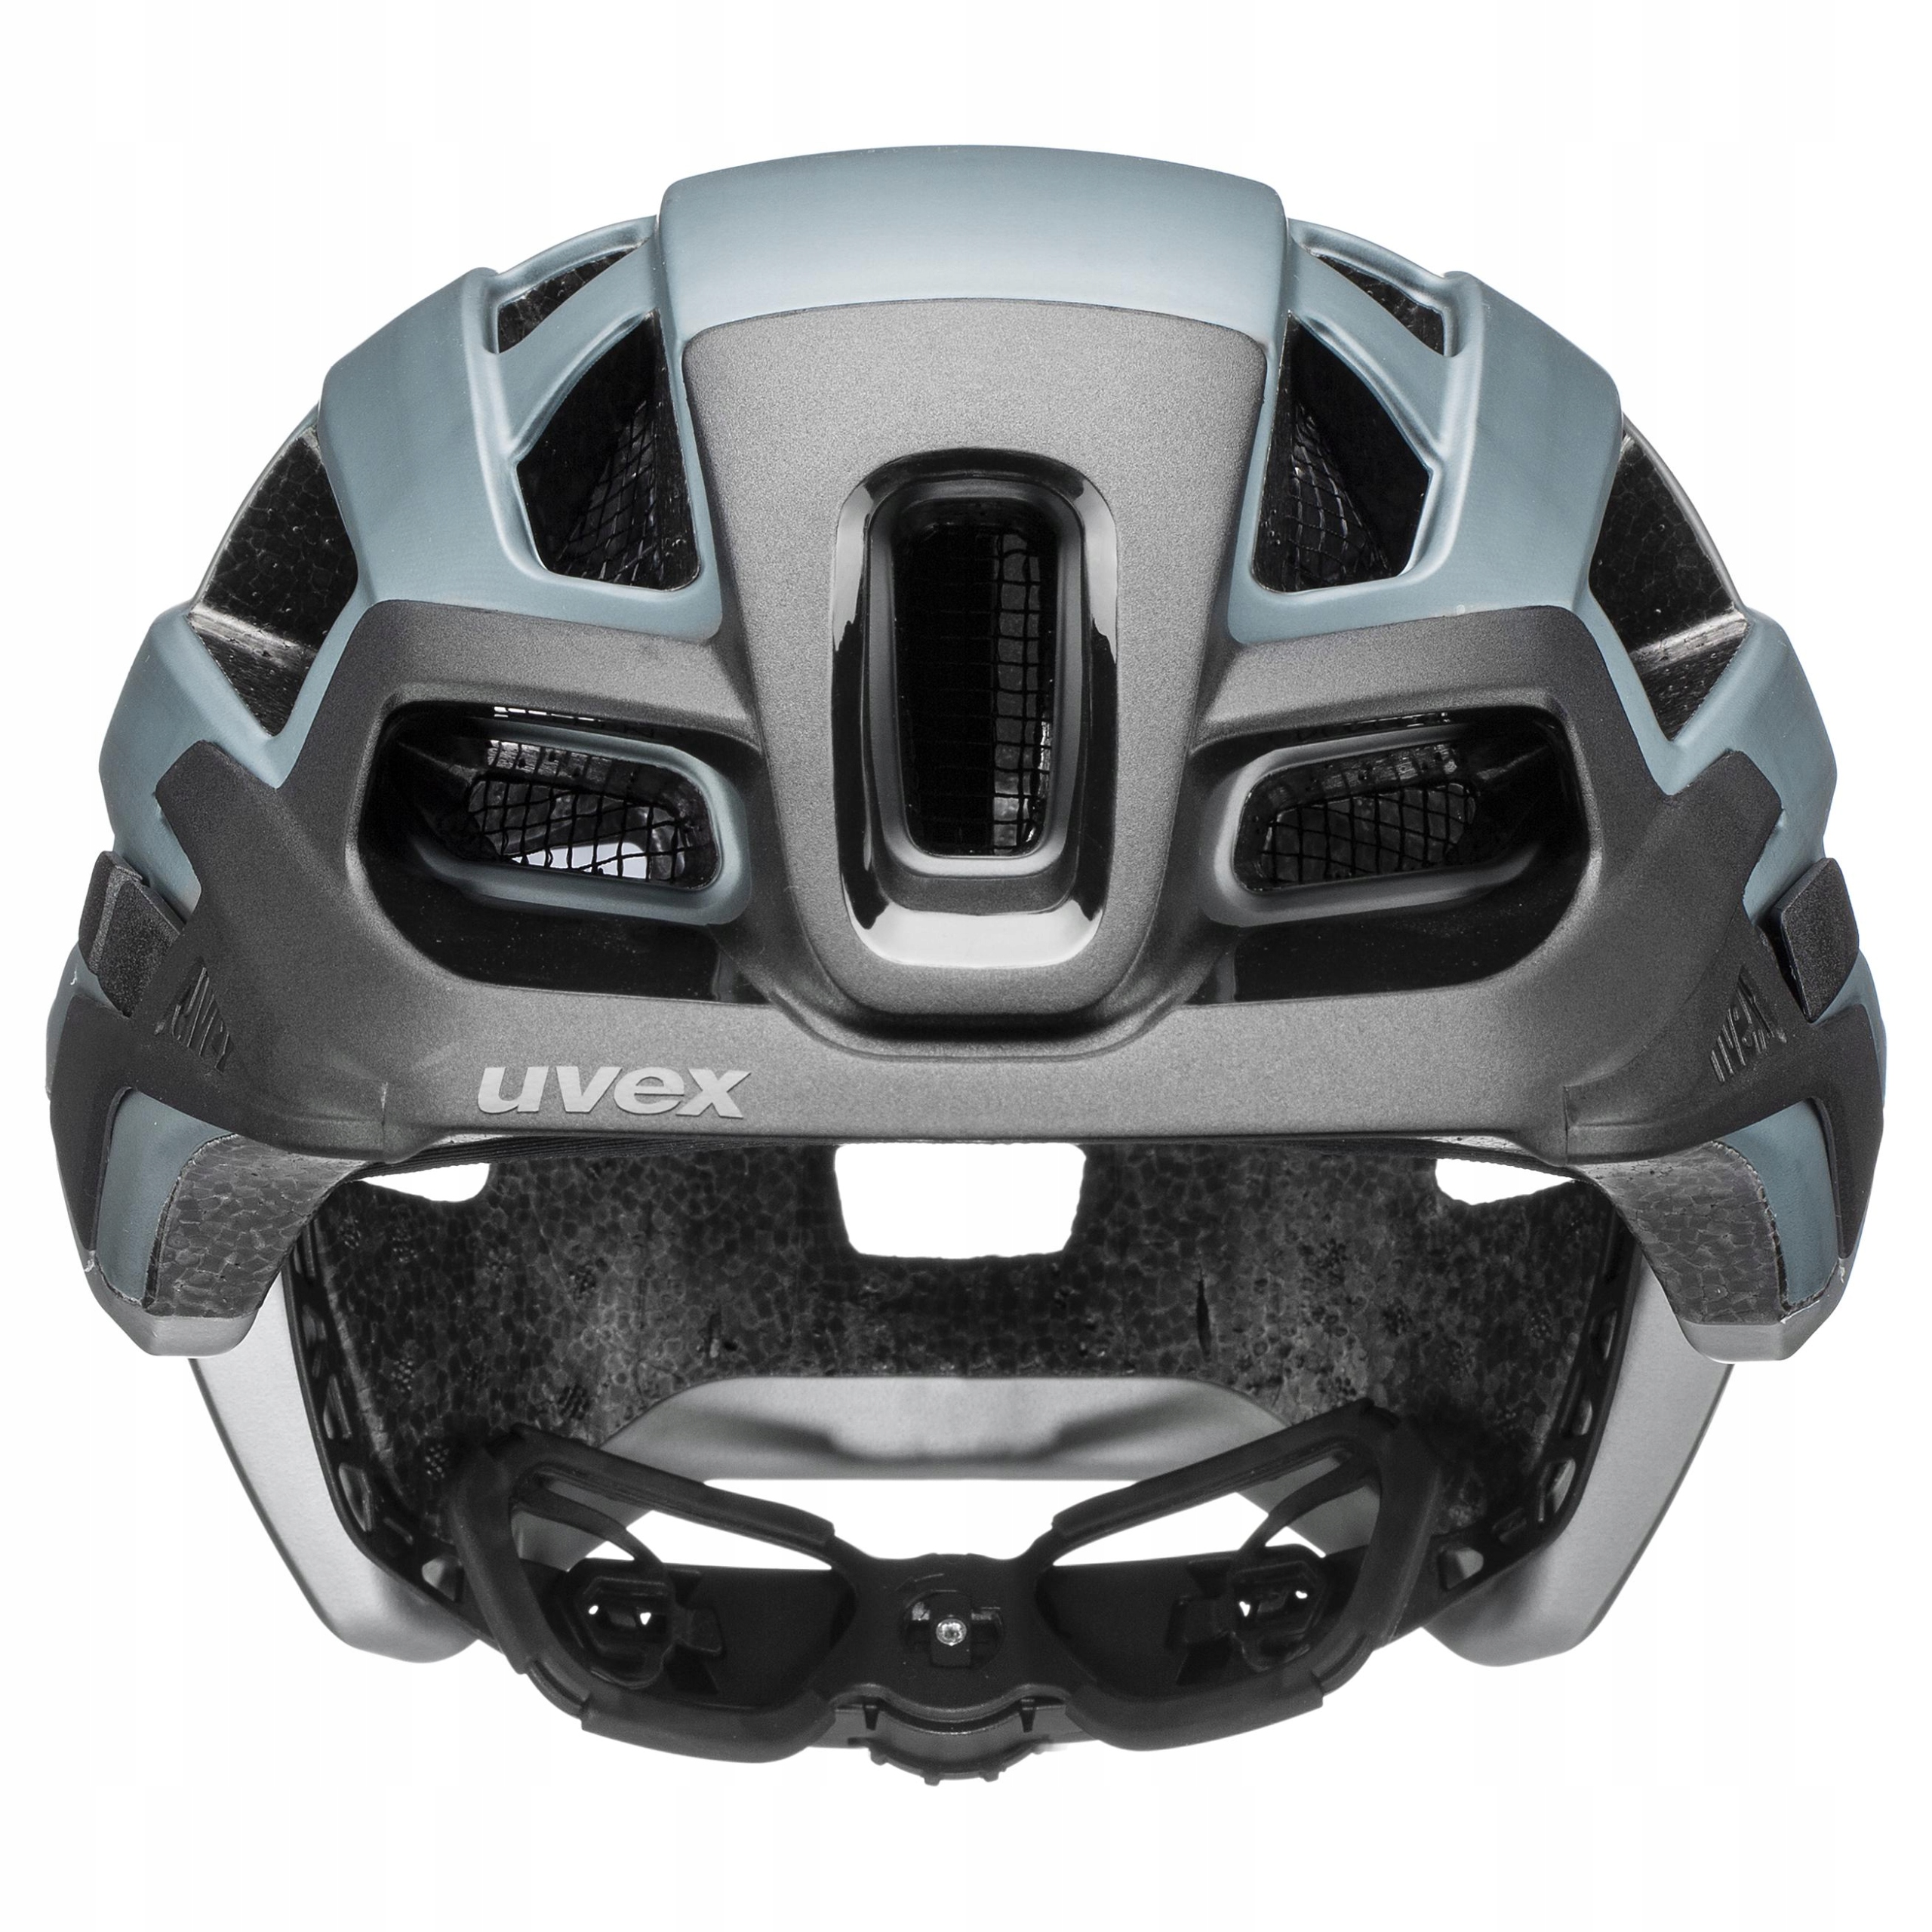 Kask rowerowy Uvex Finale light 2.0 Марка Uvex